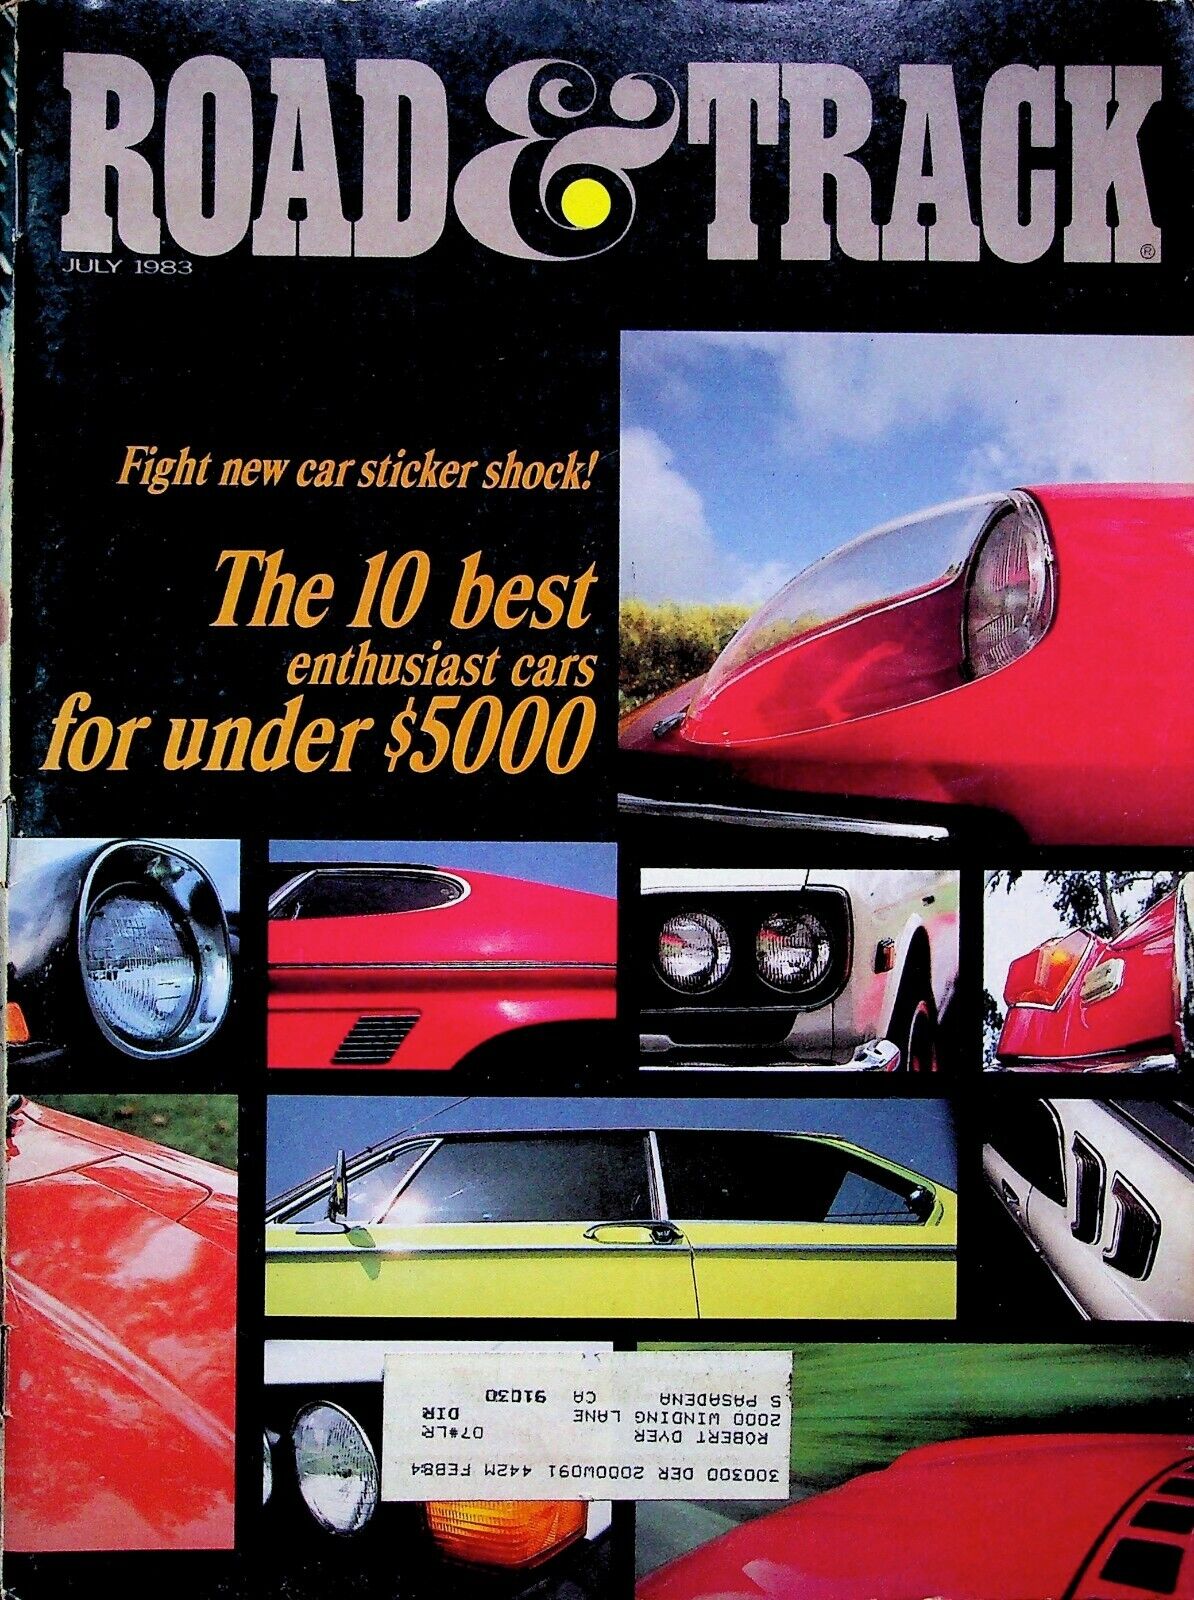 THE 10 BEST ENTHUSIAST CARS - ROAD & TRACK MAGAZINE,  JULY 1983 VOLUME 34